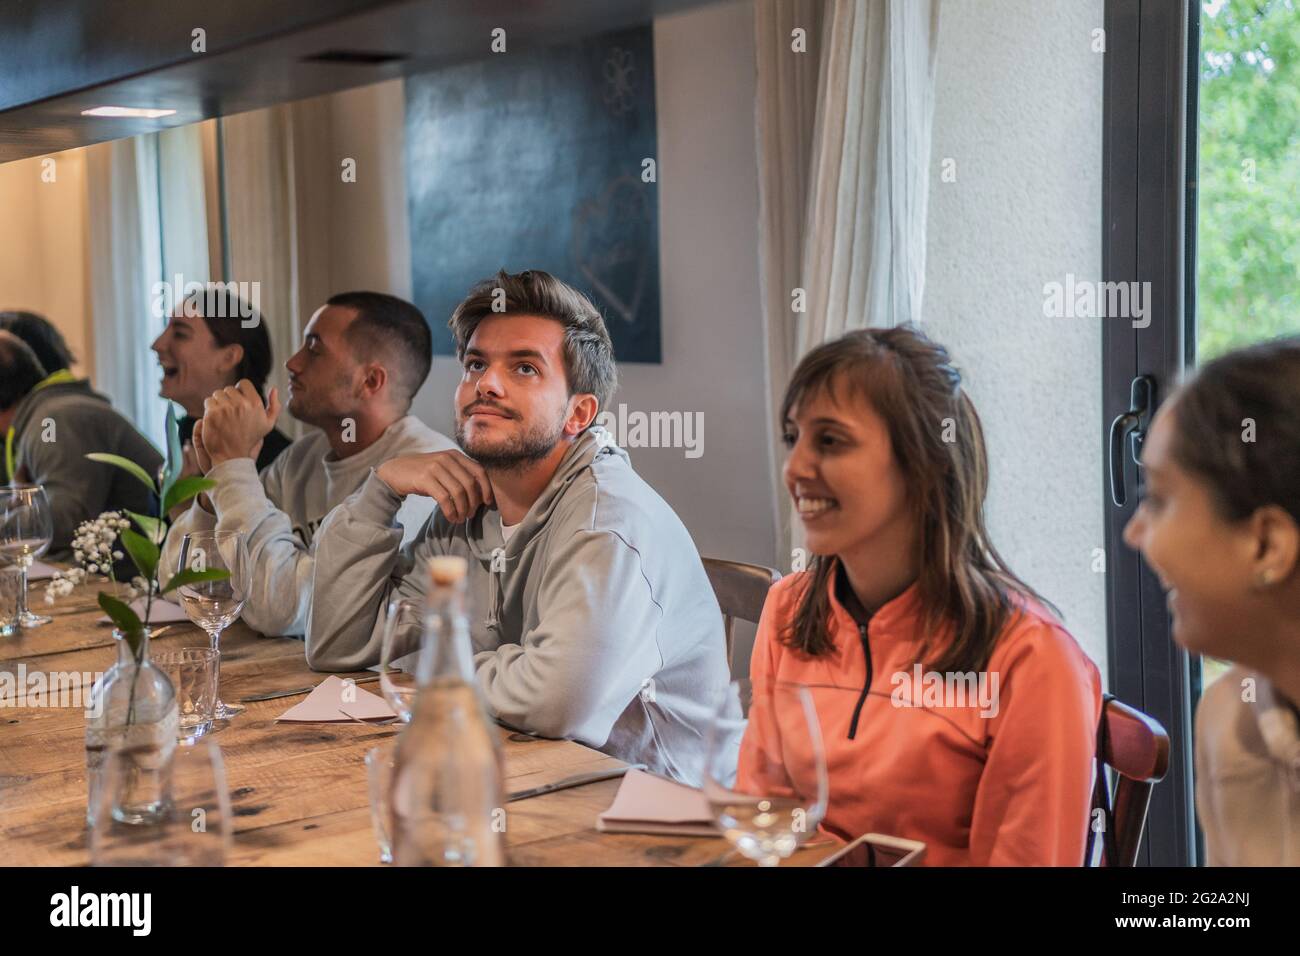 Smiling joyful people spending time and enjoying at table with glasses celebrating in light room Stock Photo